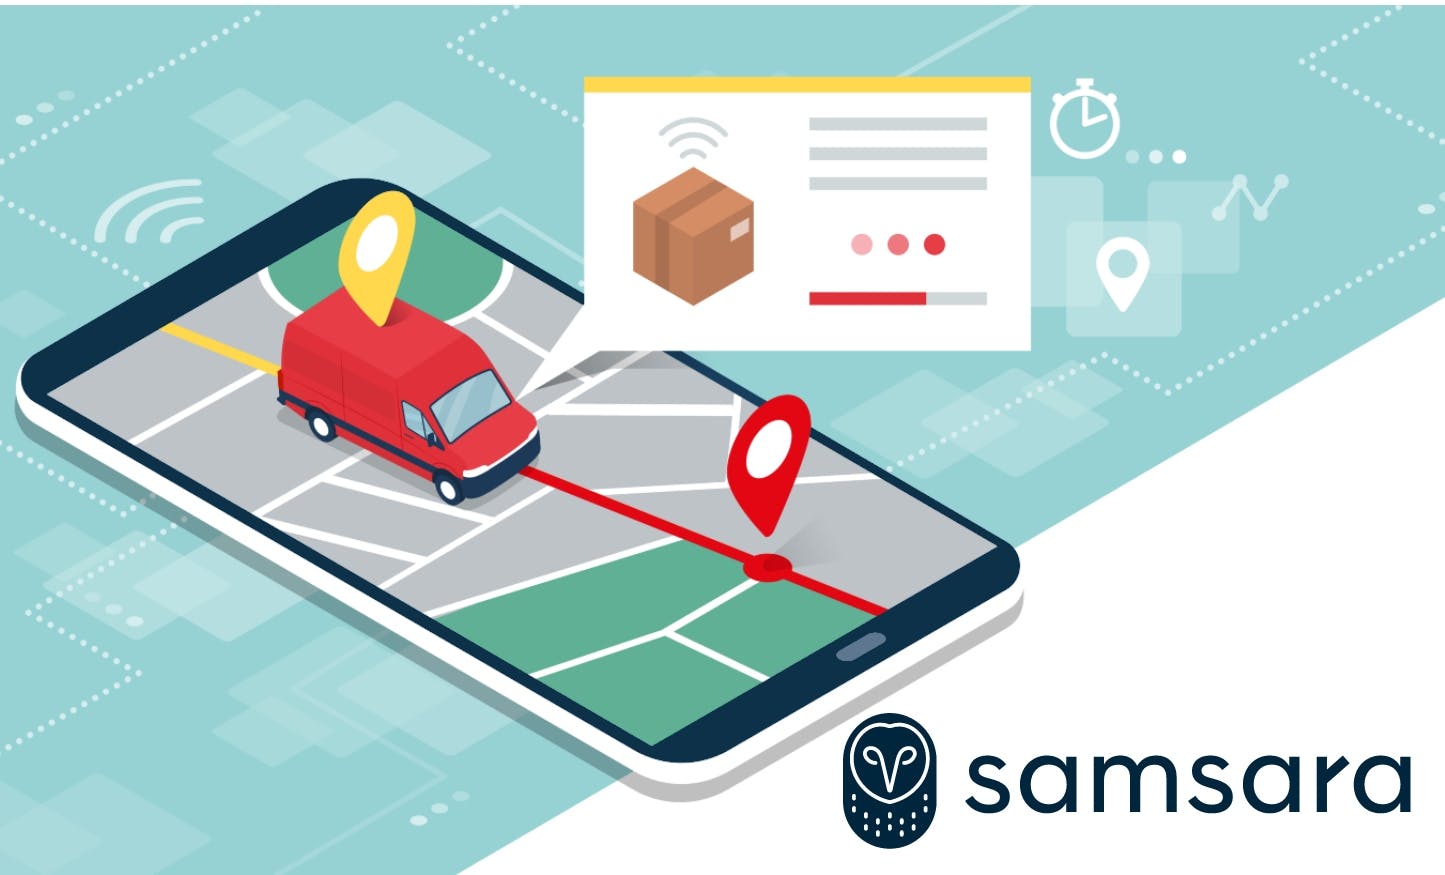 Samsara: Products, Solutions, and Full Review